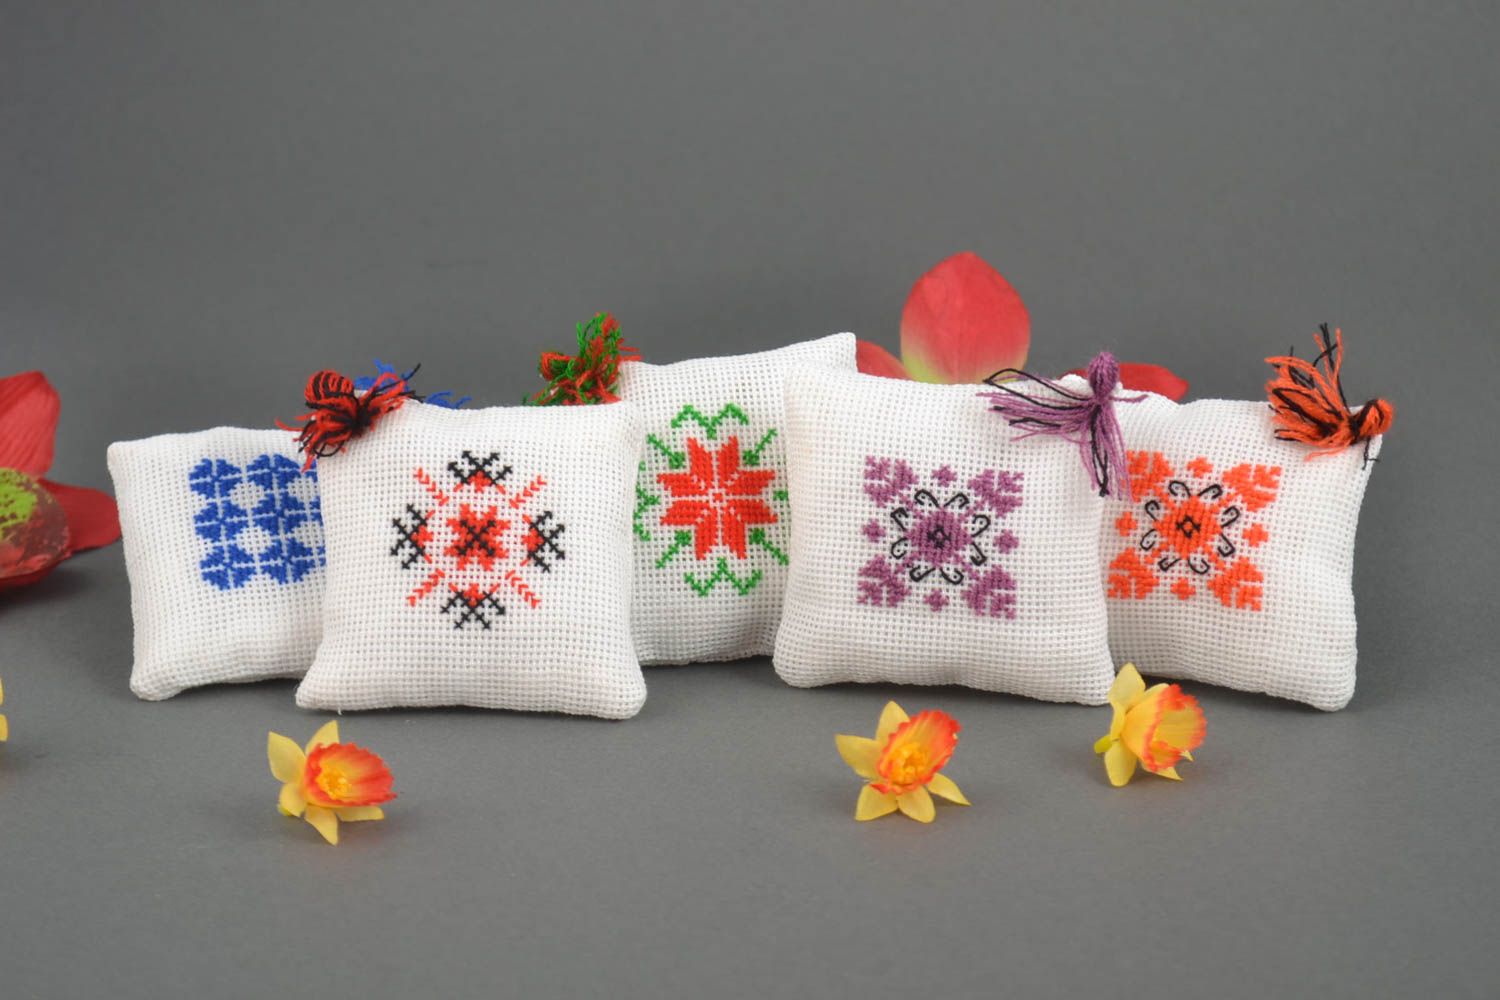 Handmade pin cushions 5 needle cases embroidery supplies handmade gifts photo 1